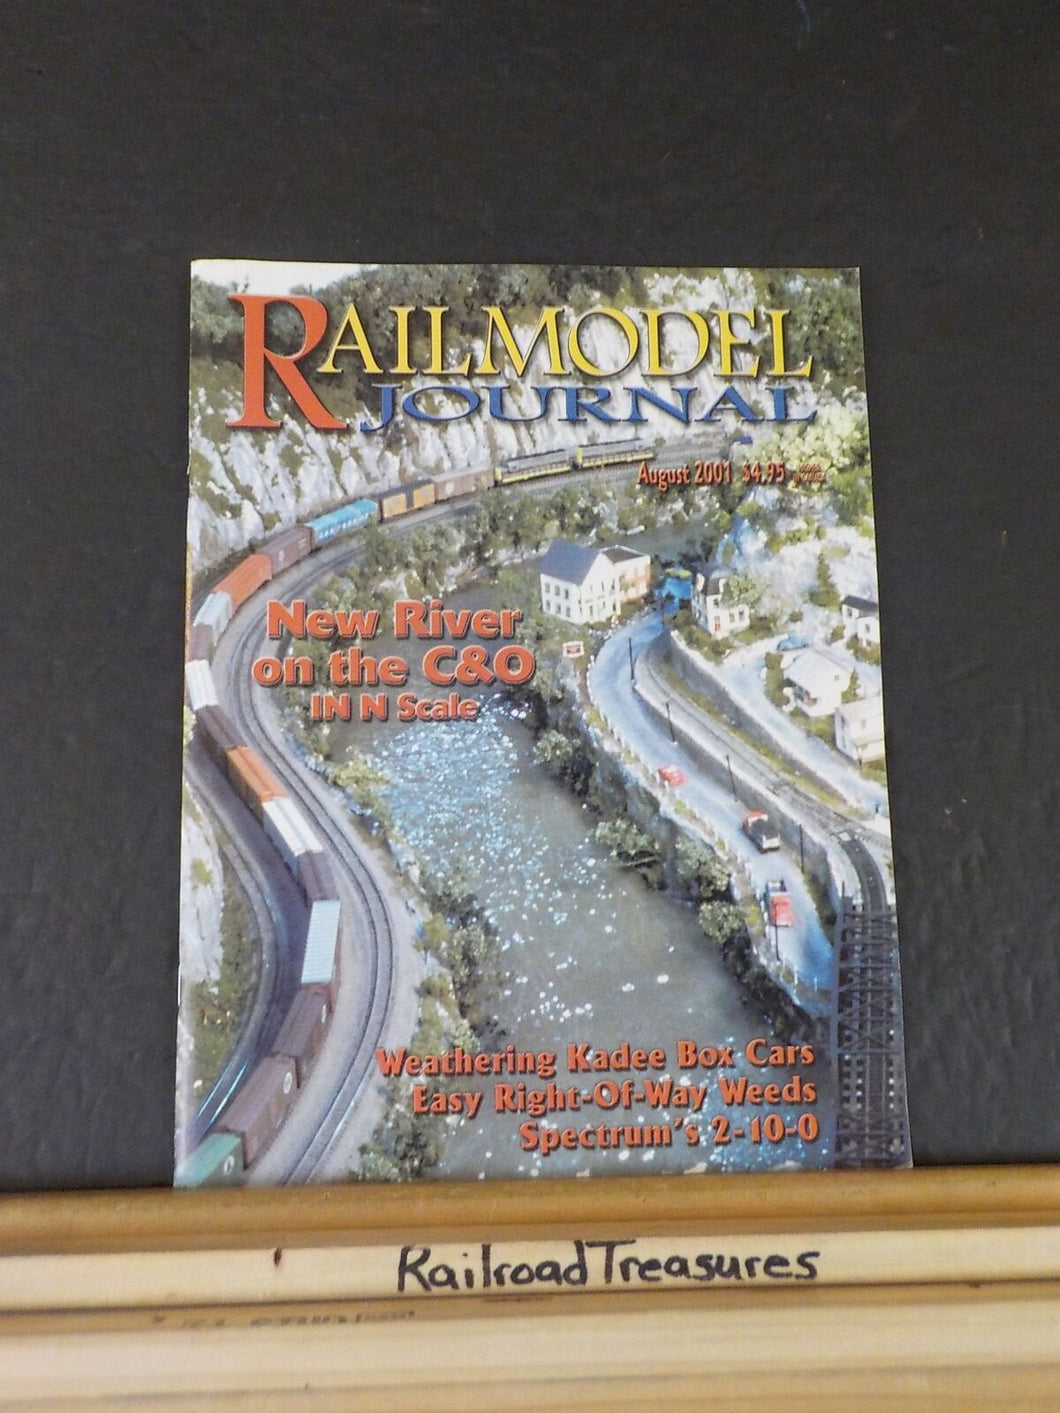 Railmodel Journal 2001 August  Vol 13 No 3 Weeds by the roll Grass that frows